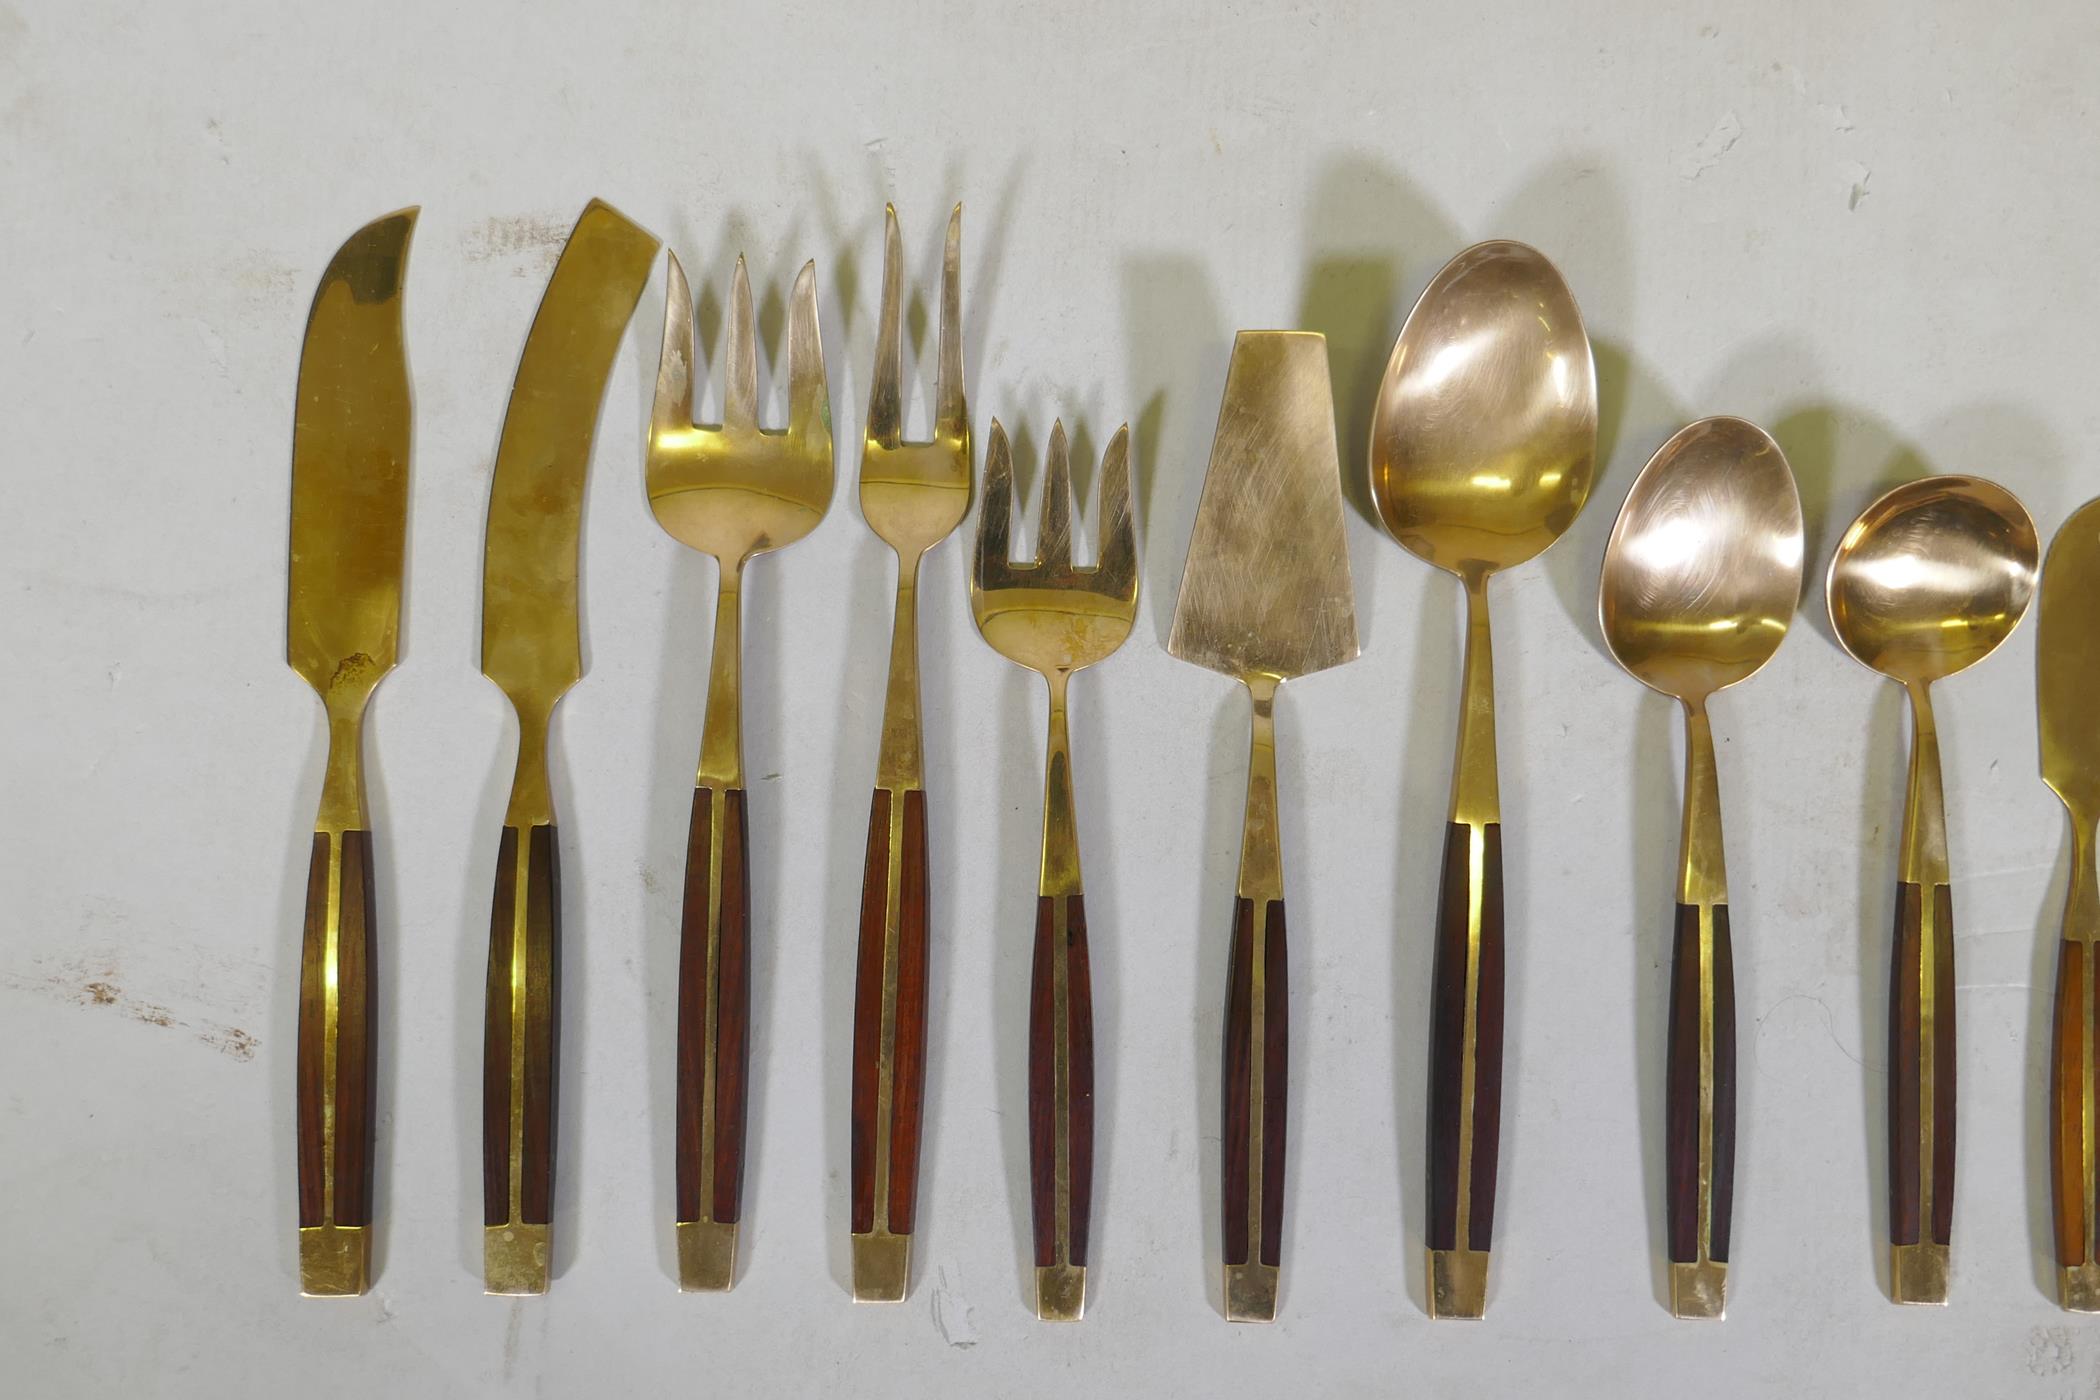 A canteen of brass and rosewood cutlery, probably Thai or Malaysian, 12 place settings - Image 5 of 7